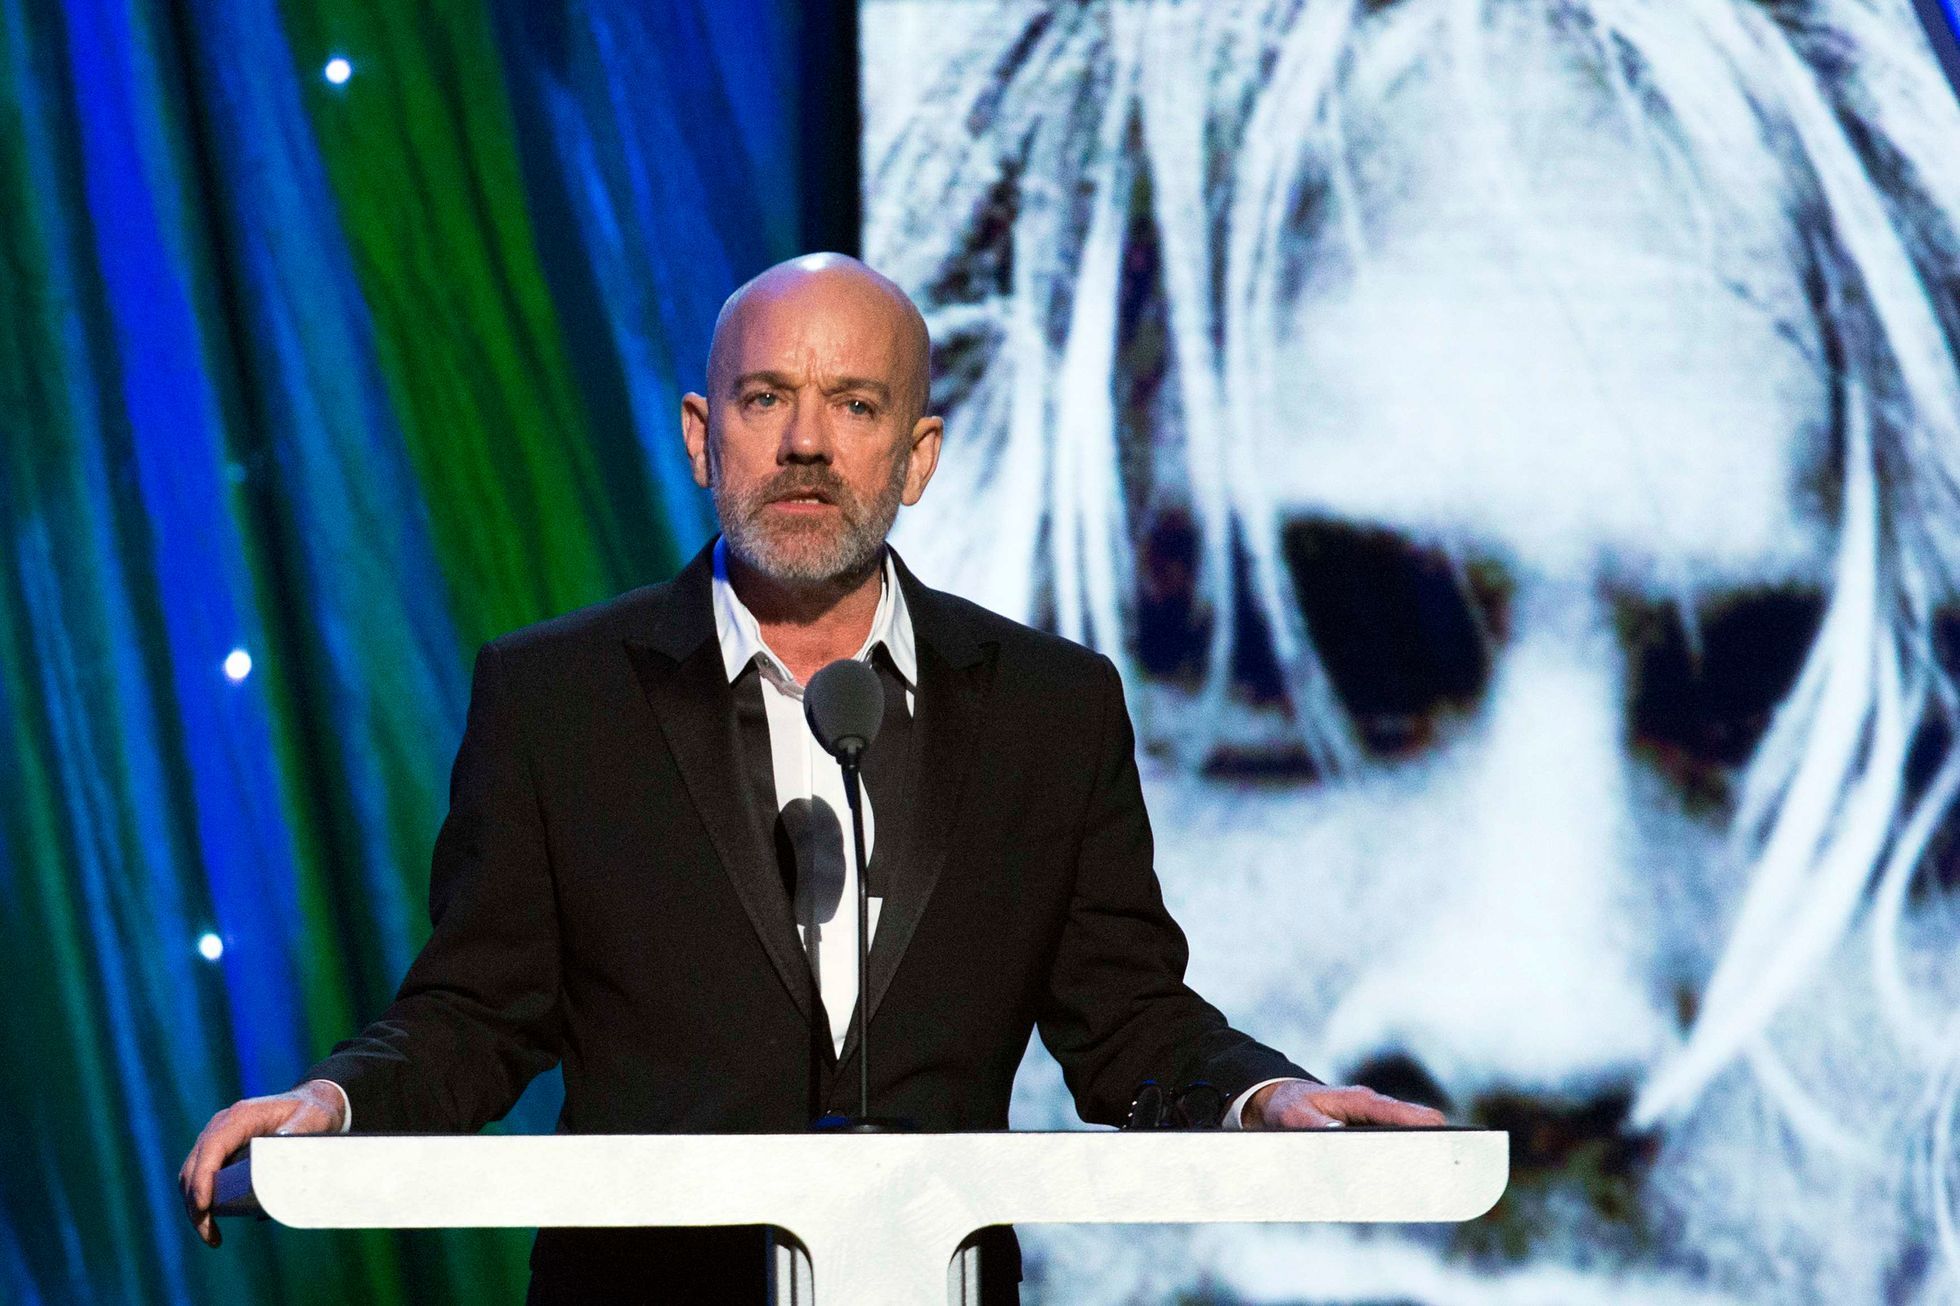 Singer Stipe introduces band Nirvana to induct band during 29th annual Rock and Roll Hall of Fame Induction Ceremony in Brooklyn, New York